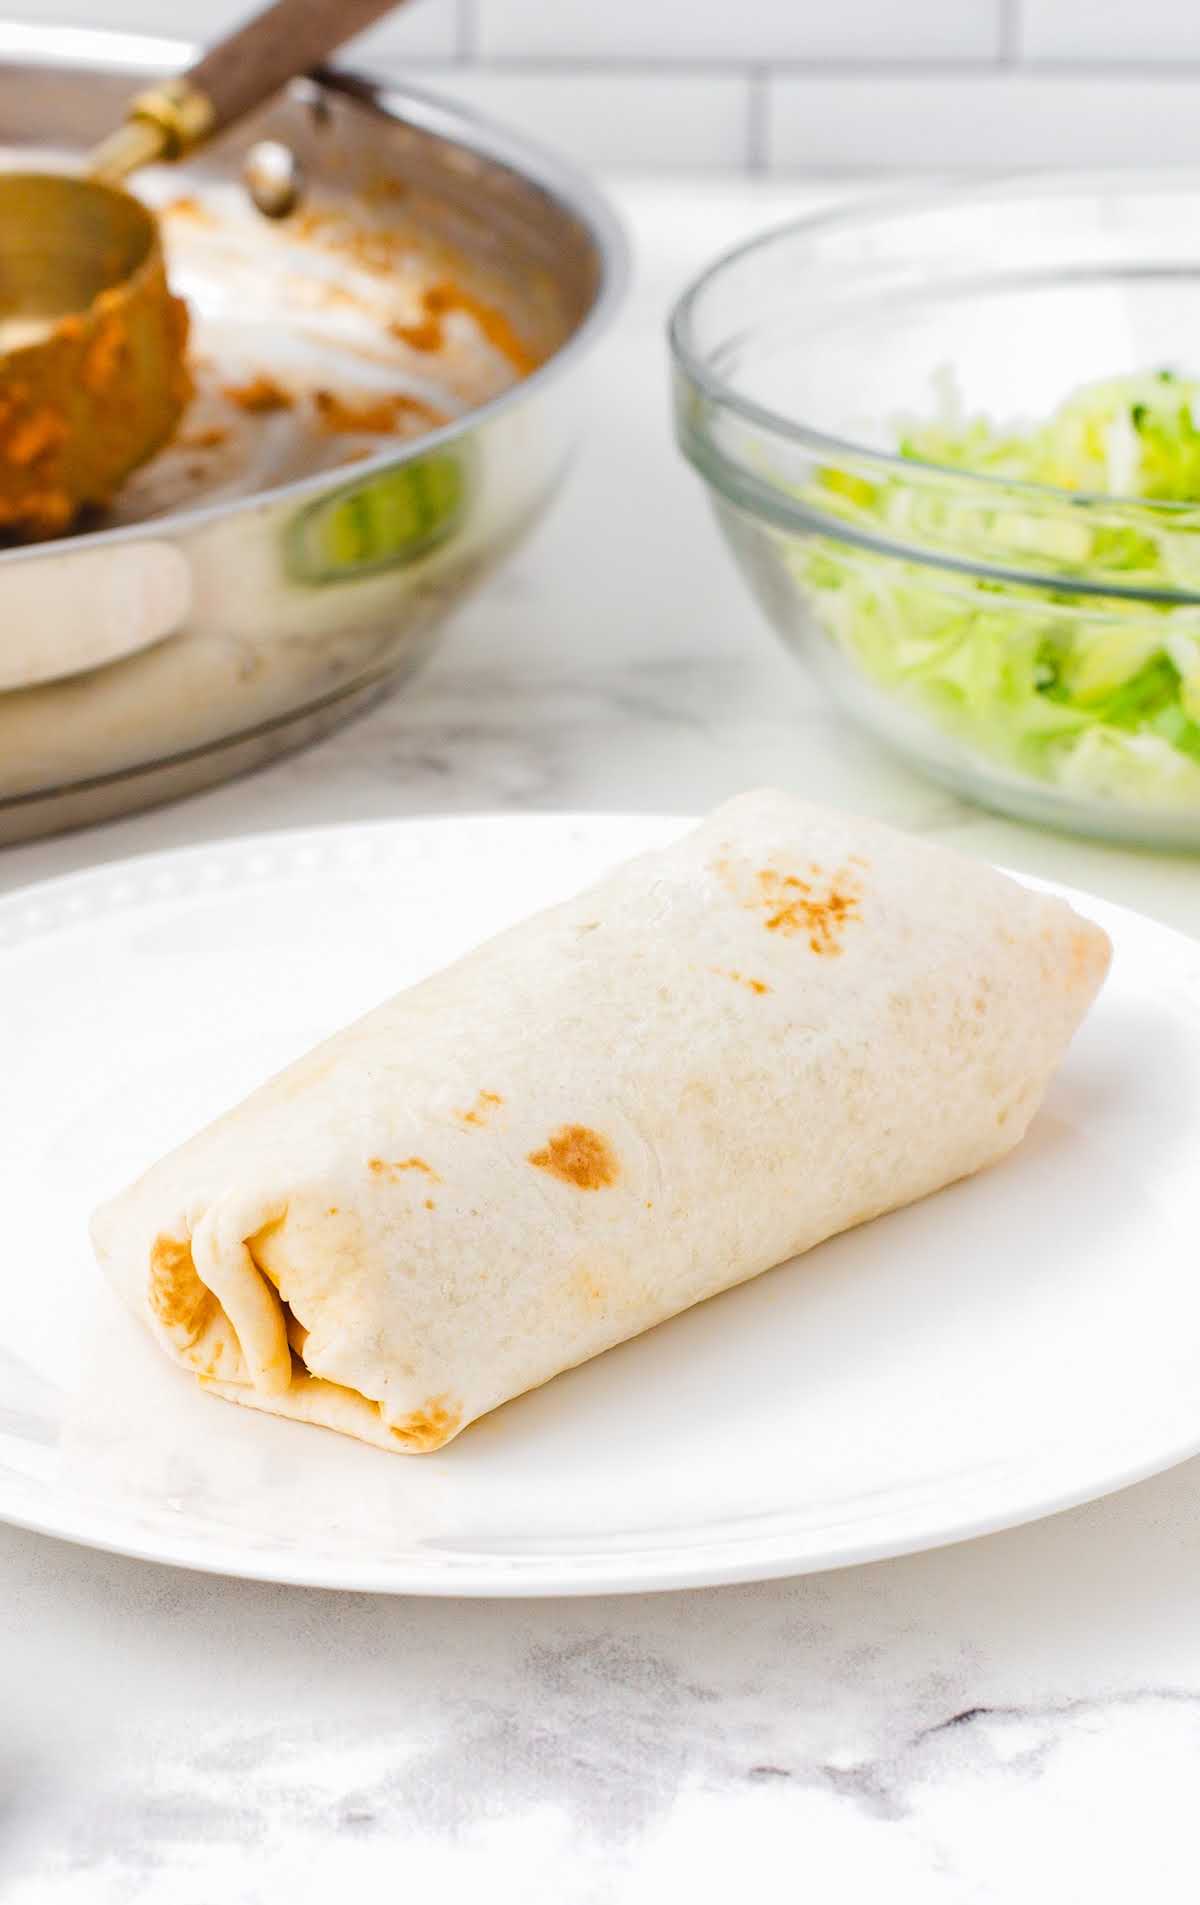 A plate of food on a table, with Burrito and Tortilla